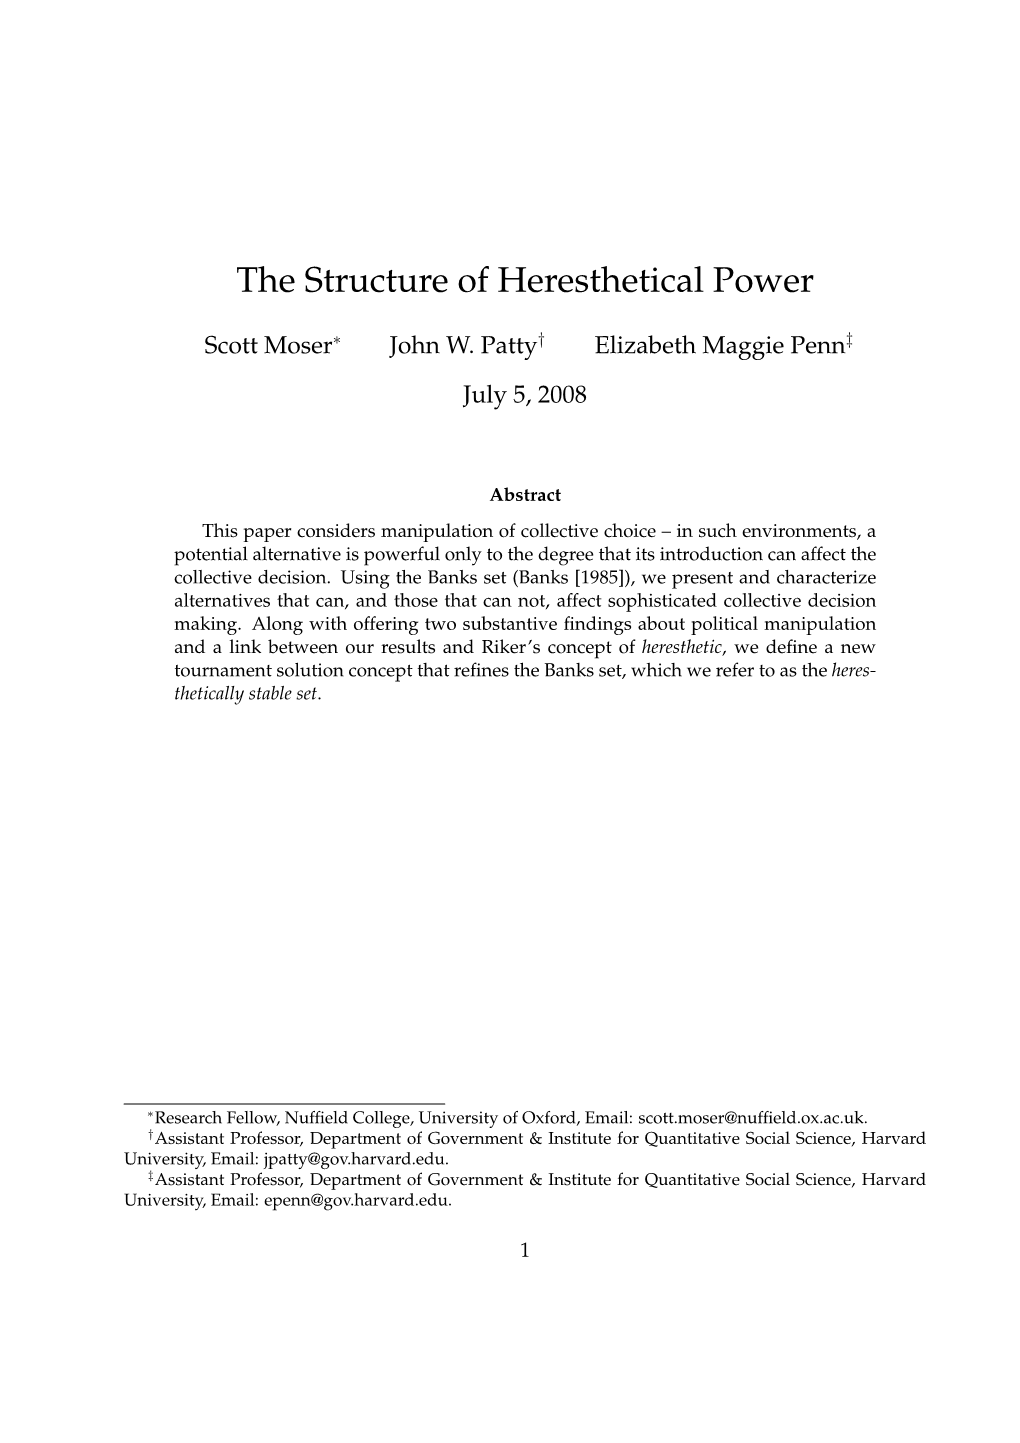 The Structure of Heresthetical Power